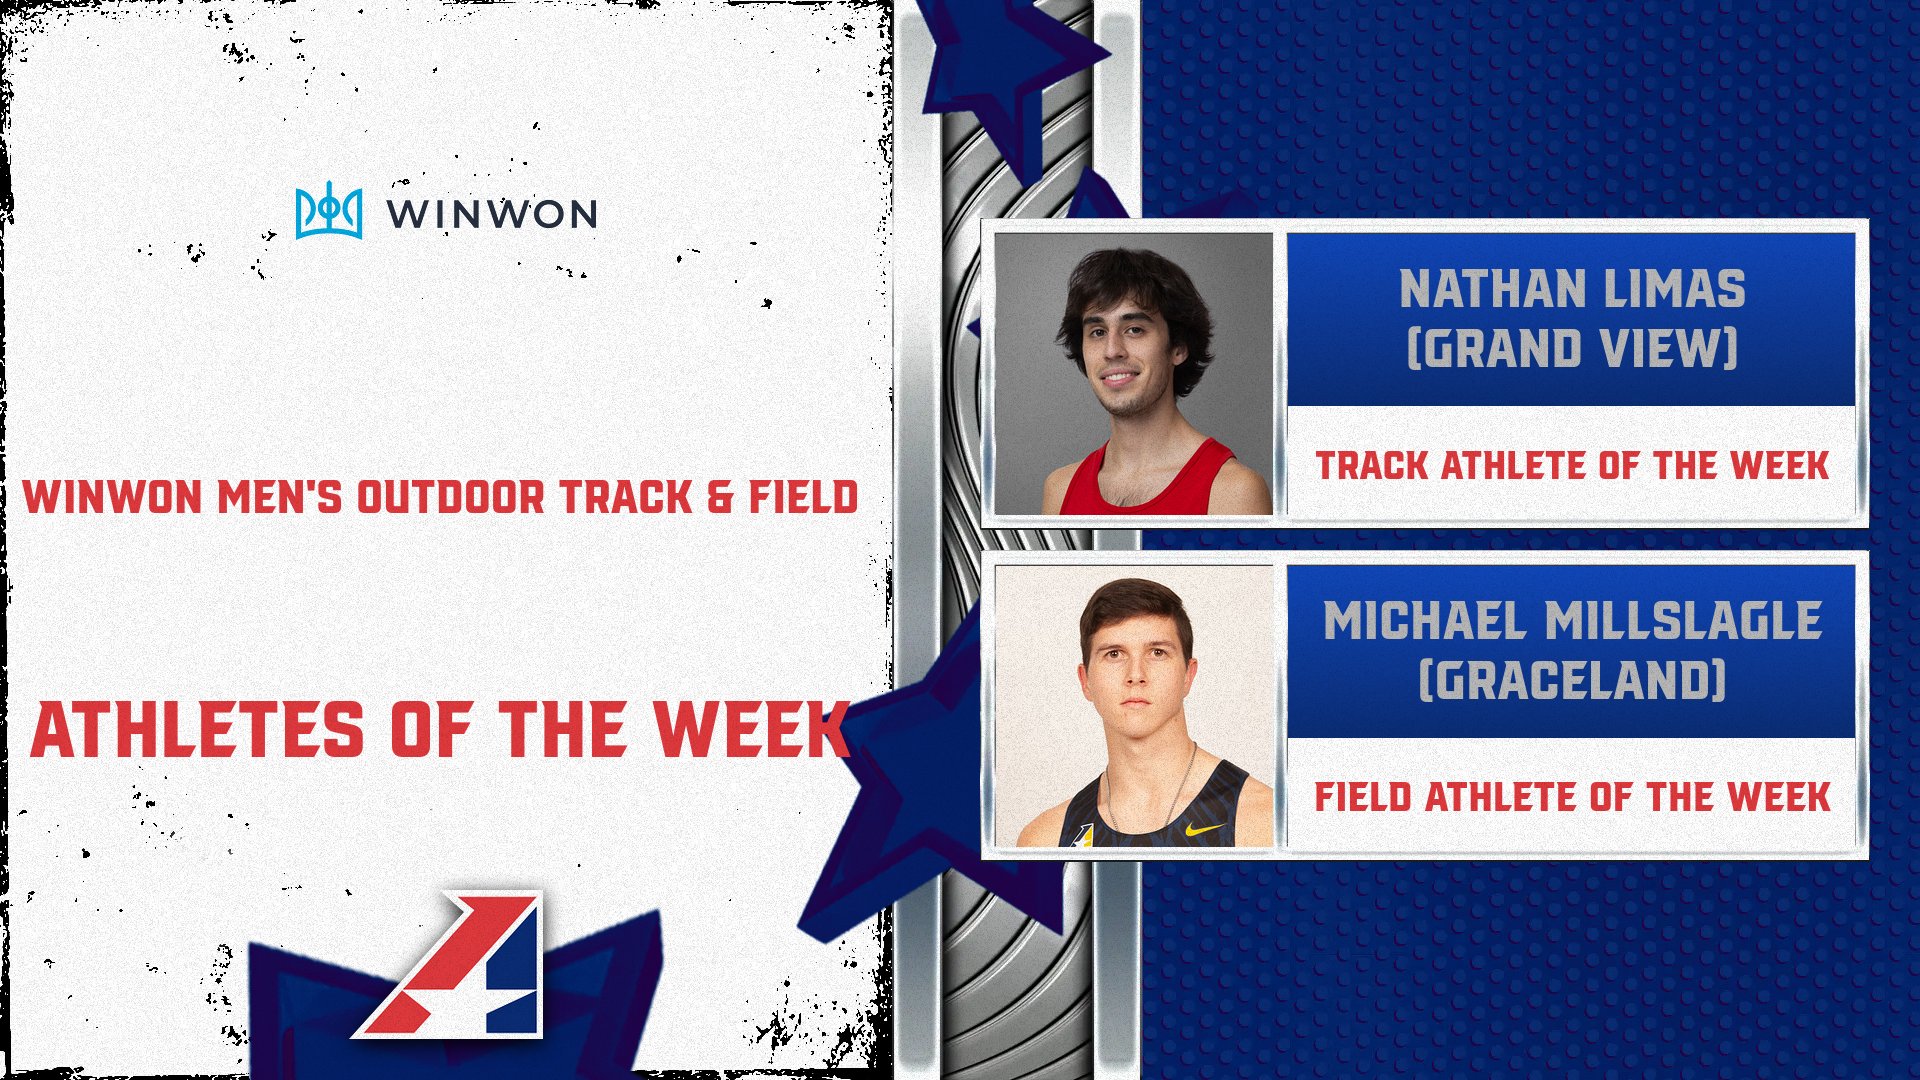 WinWon Men’s Outdoor Track & Field Athletes of the Week Announced